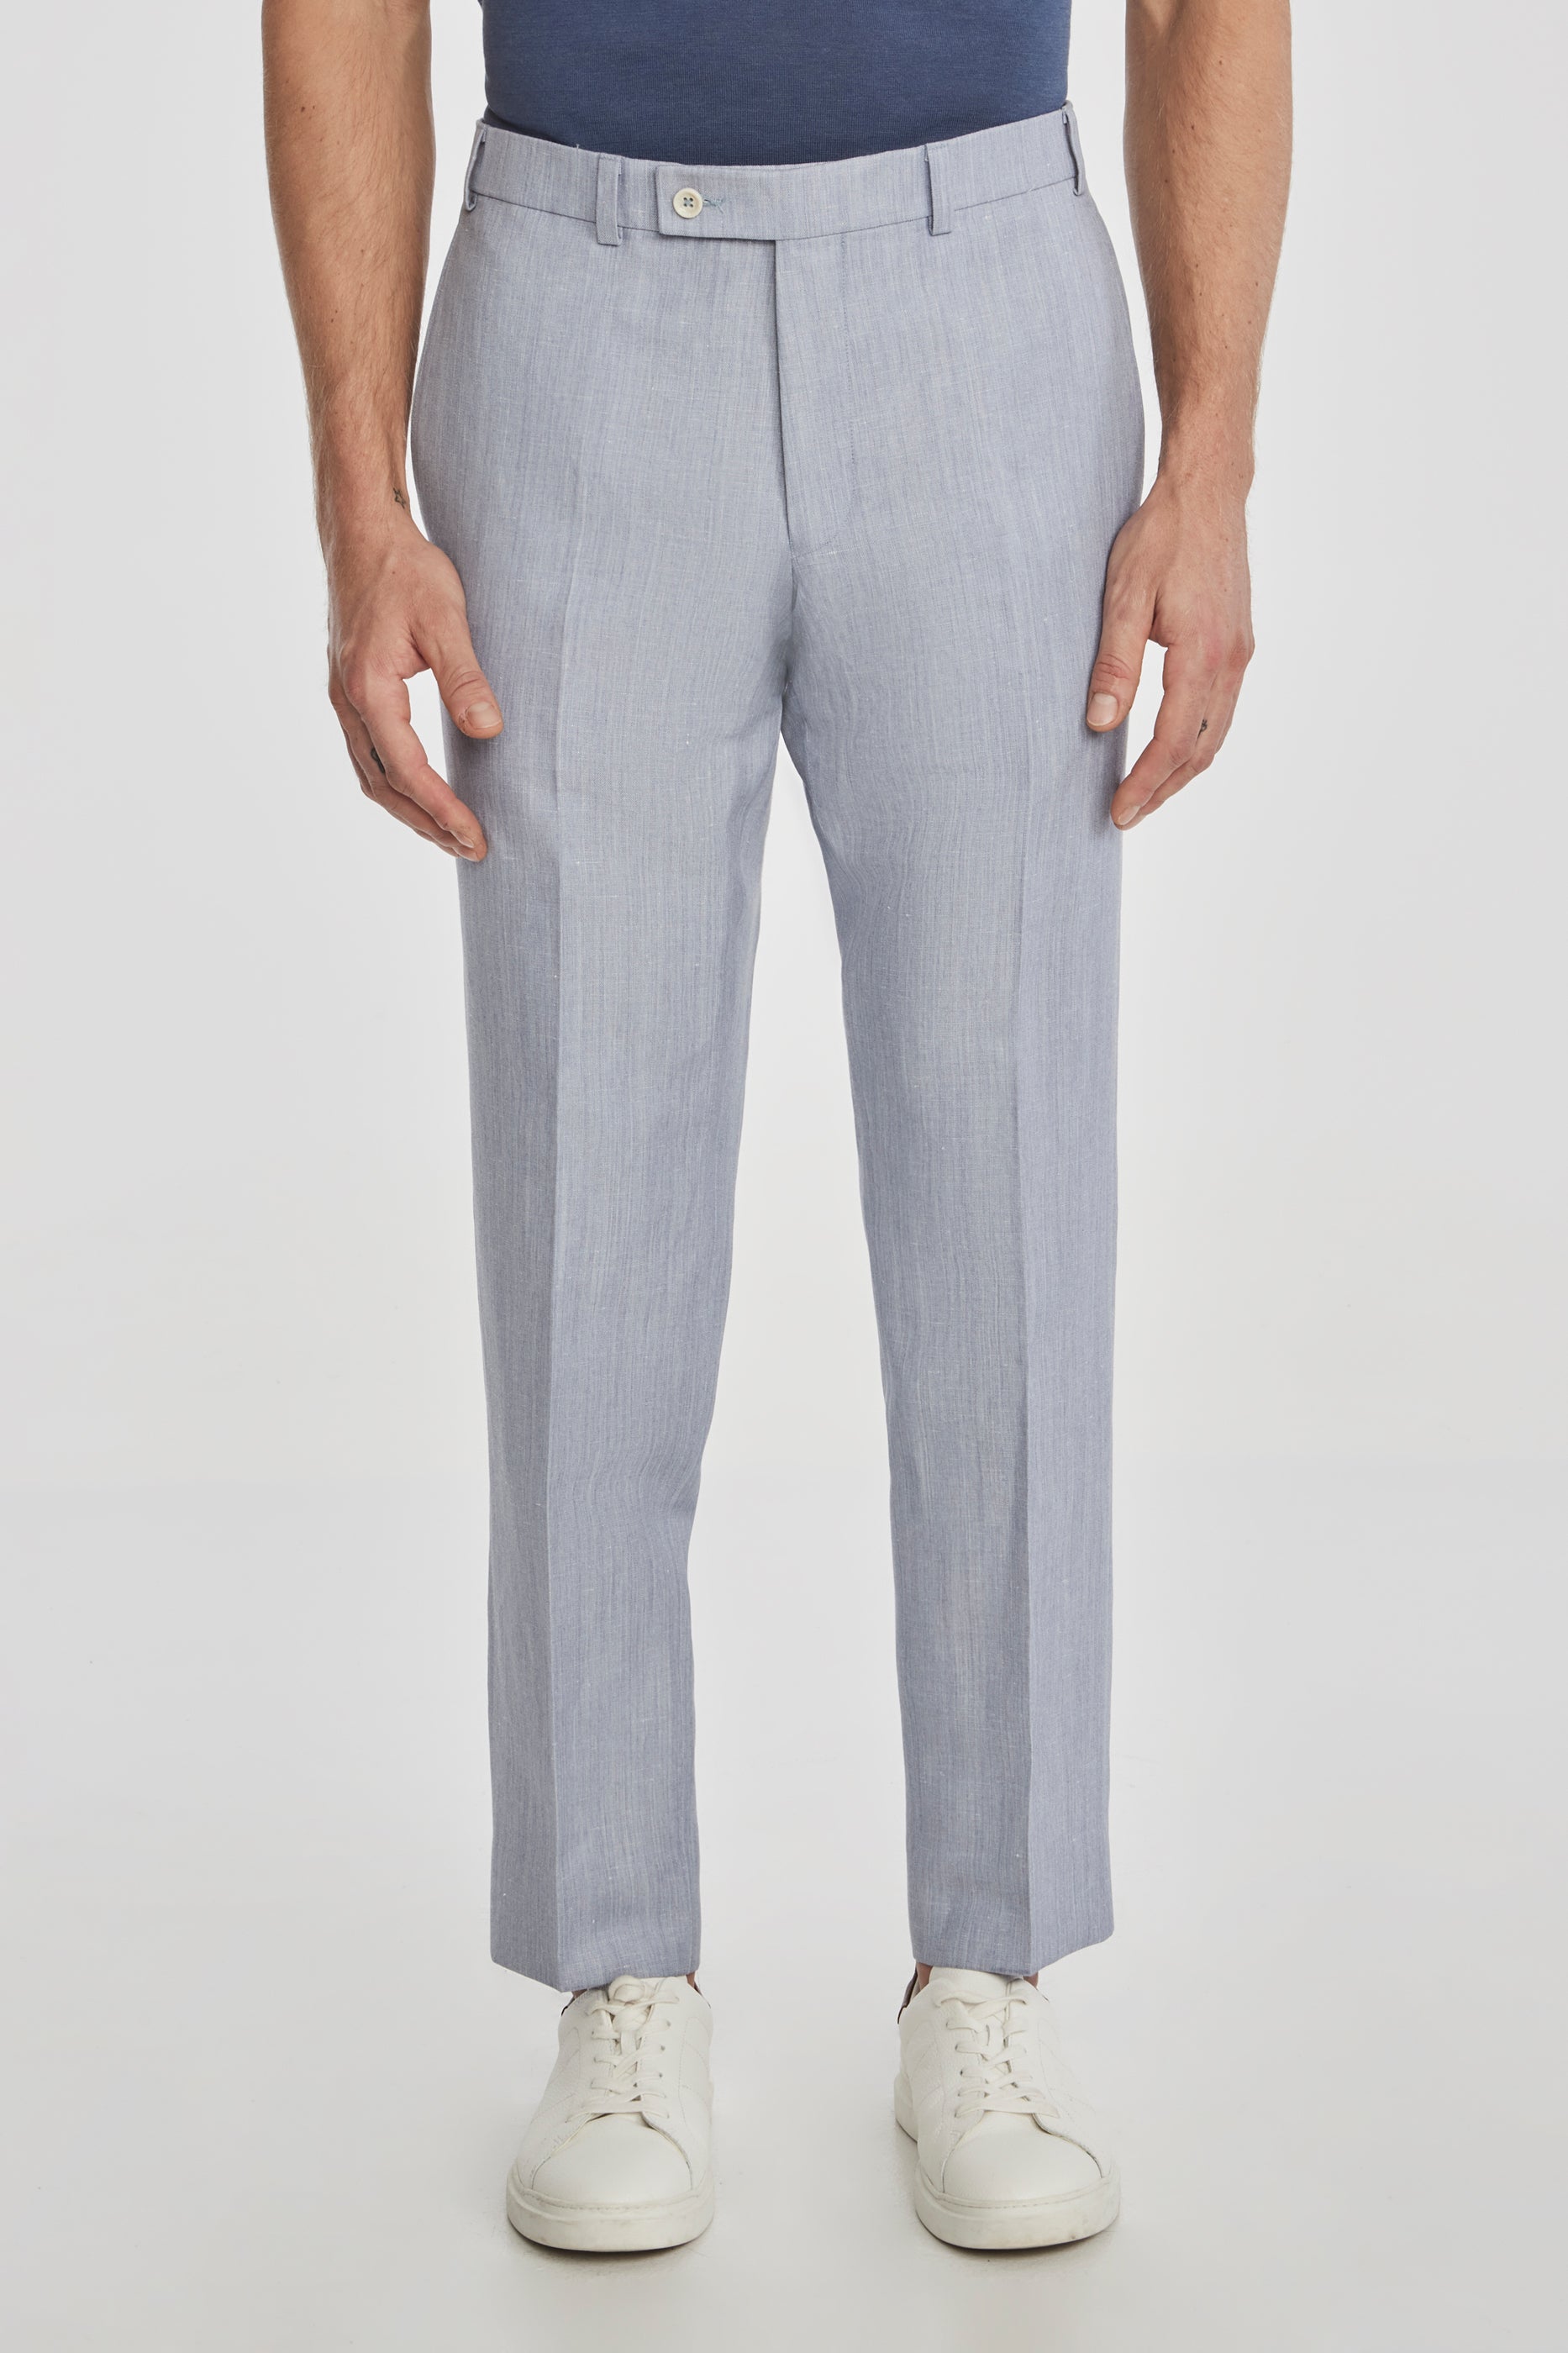 Alt view 1 Pablo Wool and Linen Tailored Trouser in Light Blue